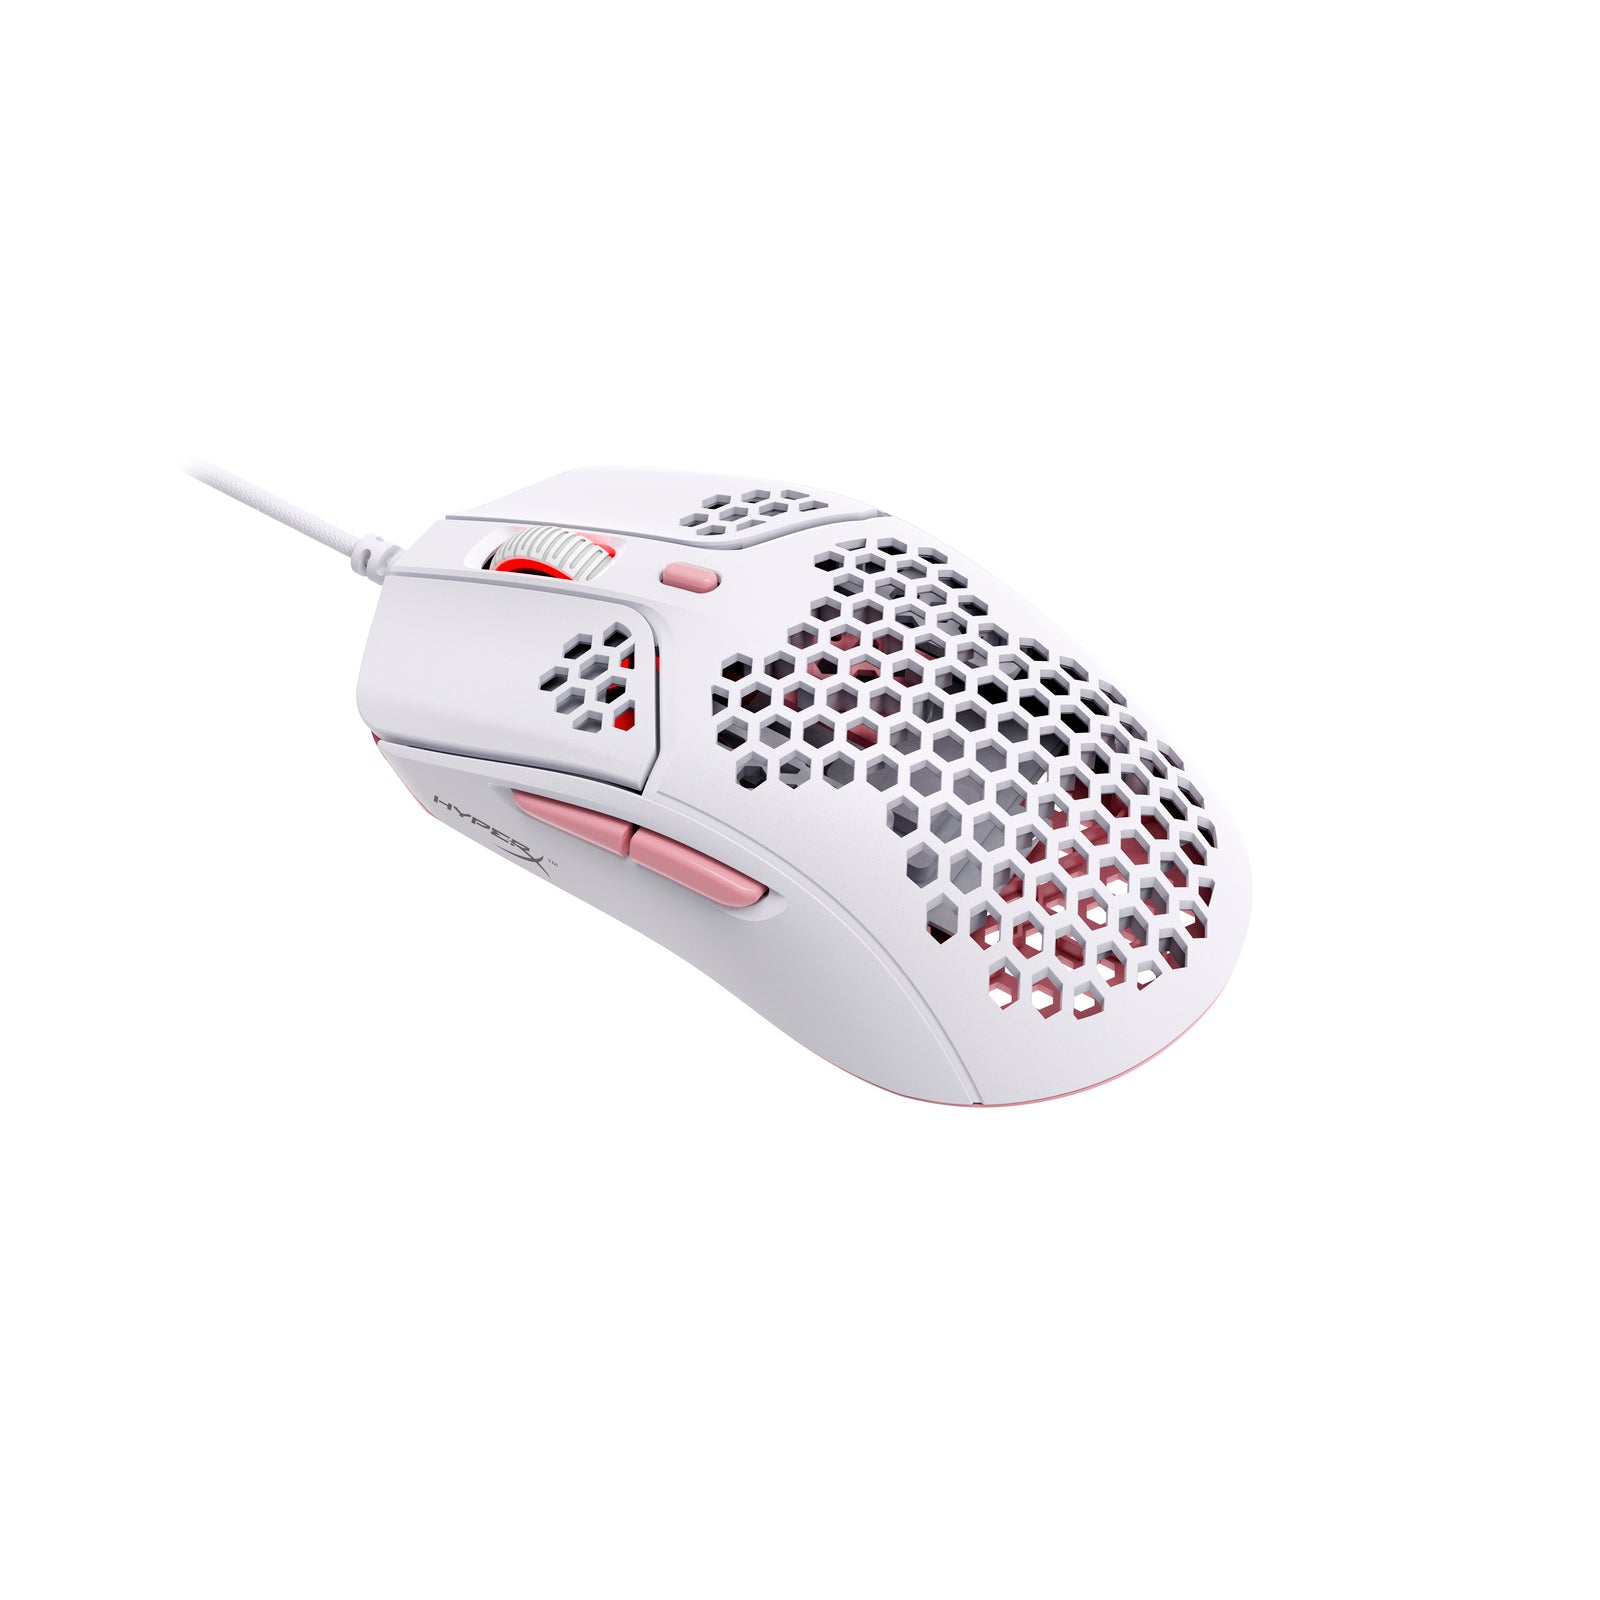 Pulsefire Haste Lightweight Gaming Mouse